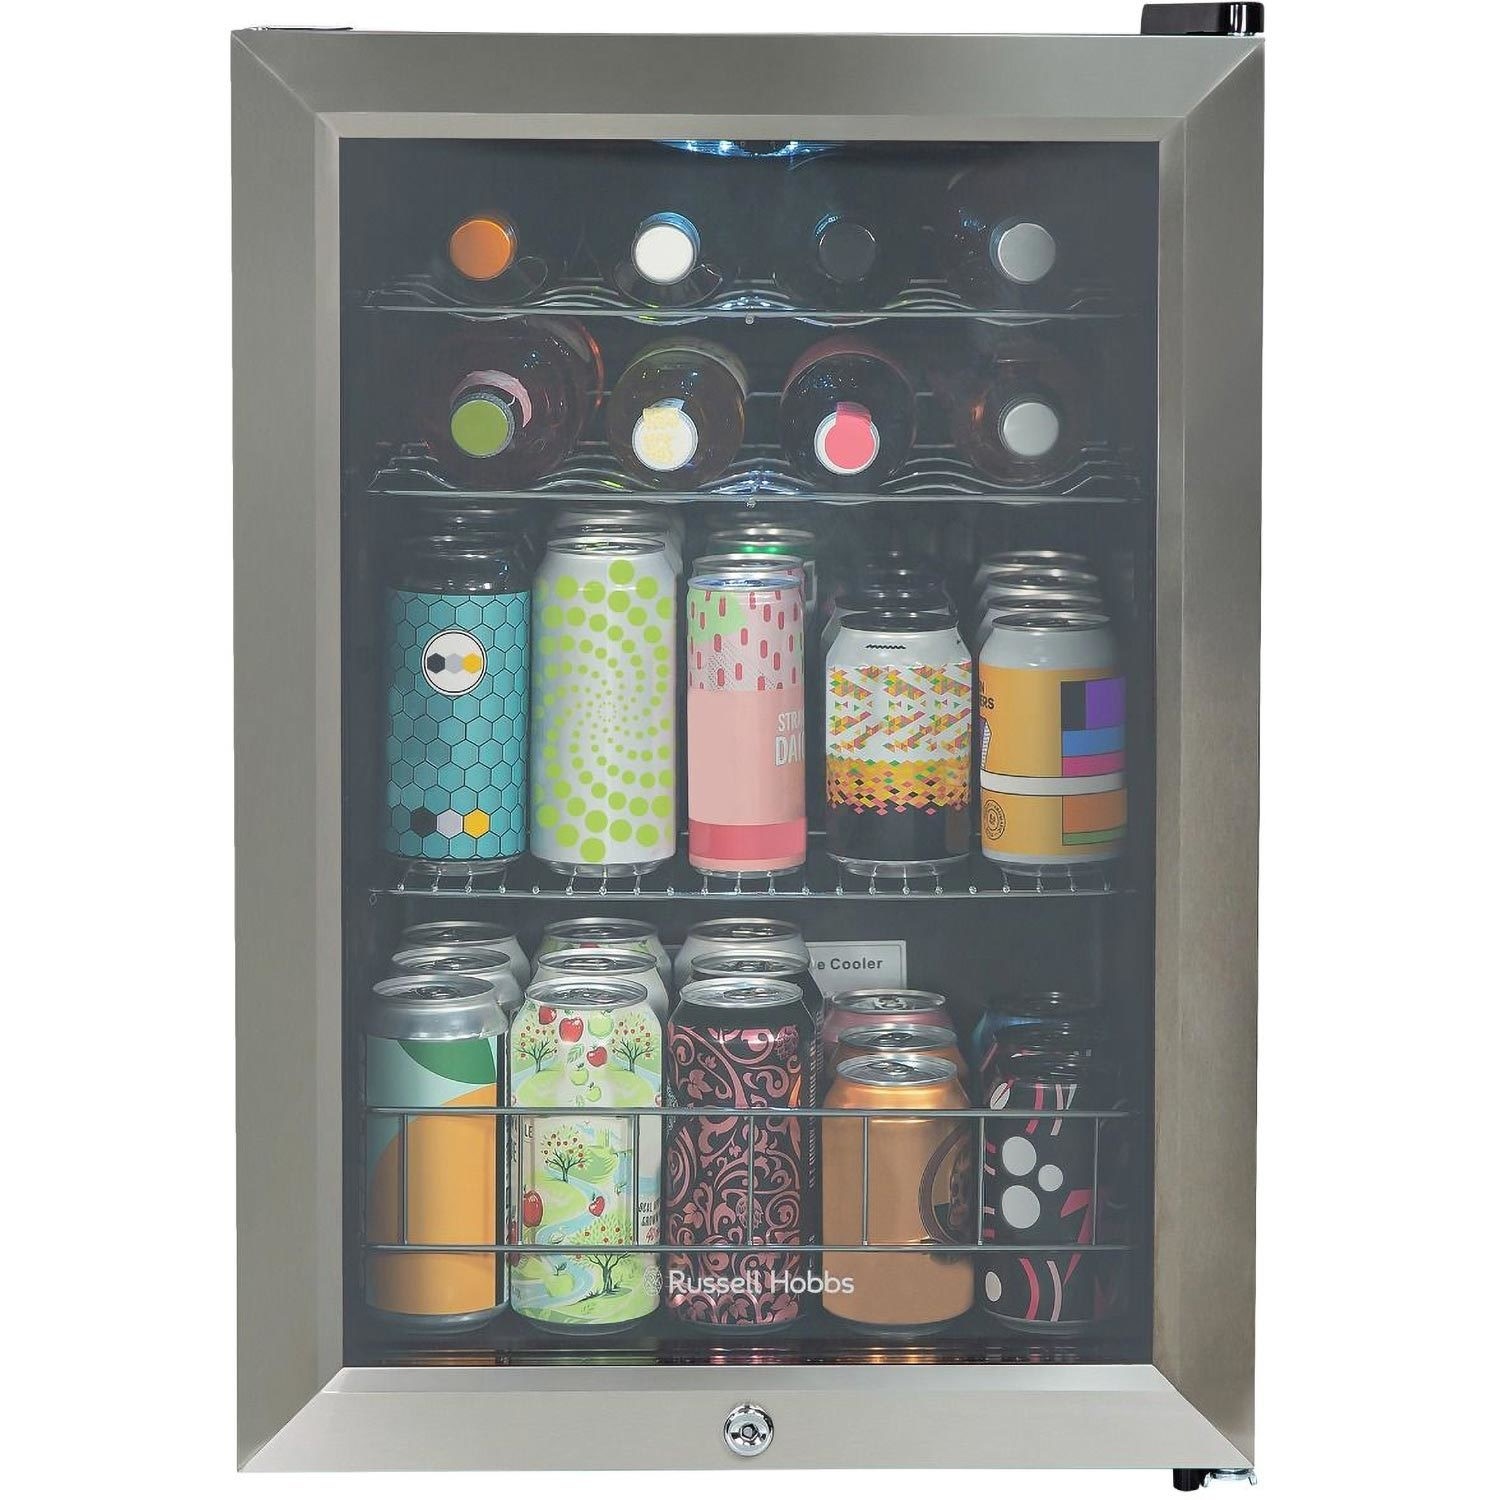 Photos - Other for Computer Russell Hobbs 62L Drinks Fridge - Stainless Steel RHGWC4SS-LCK 